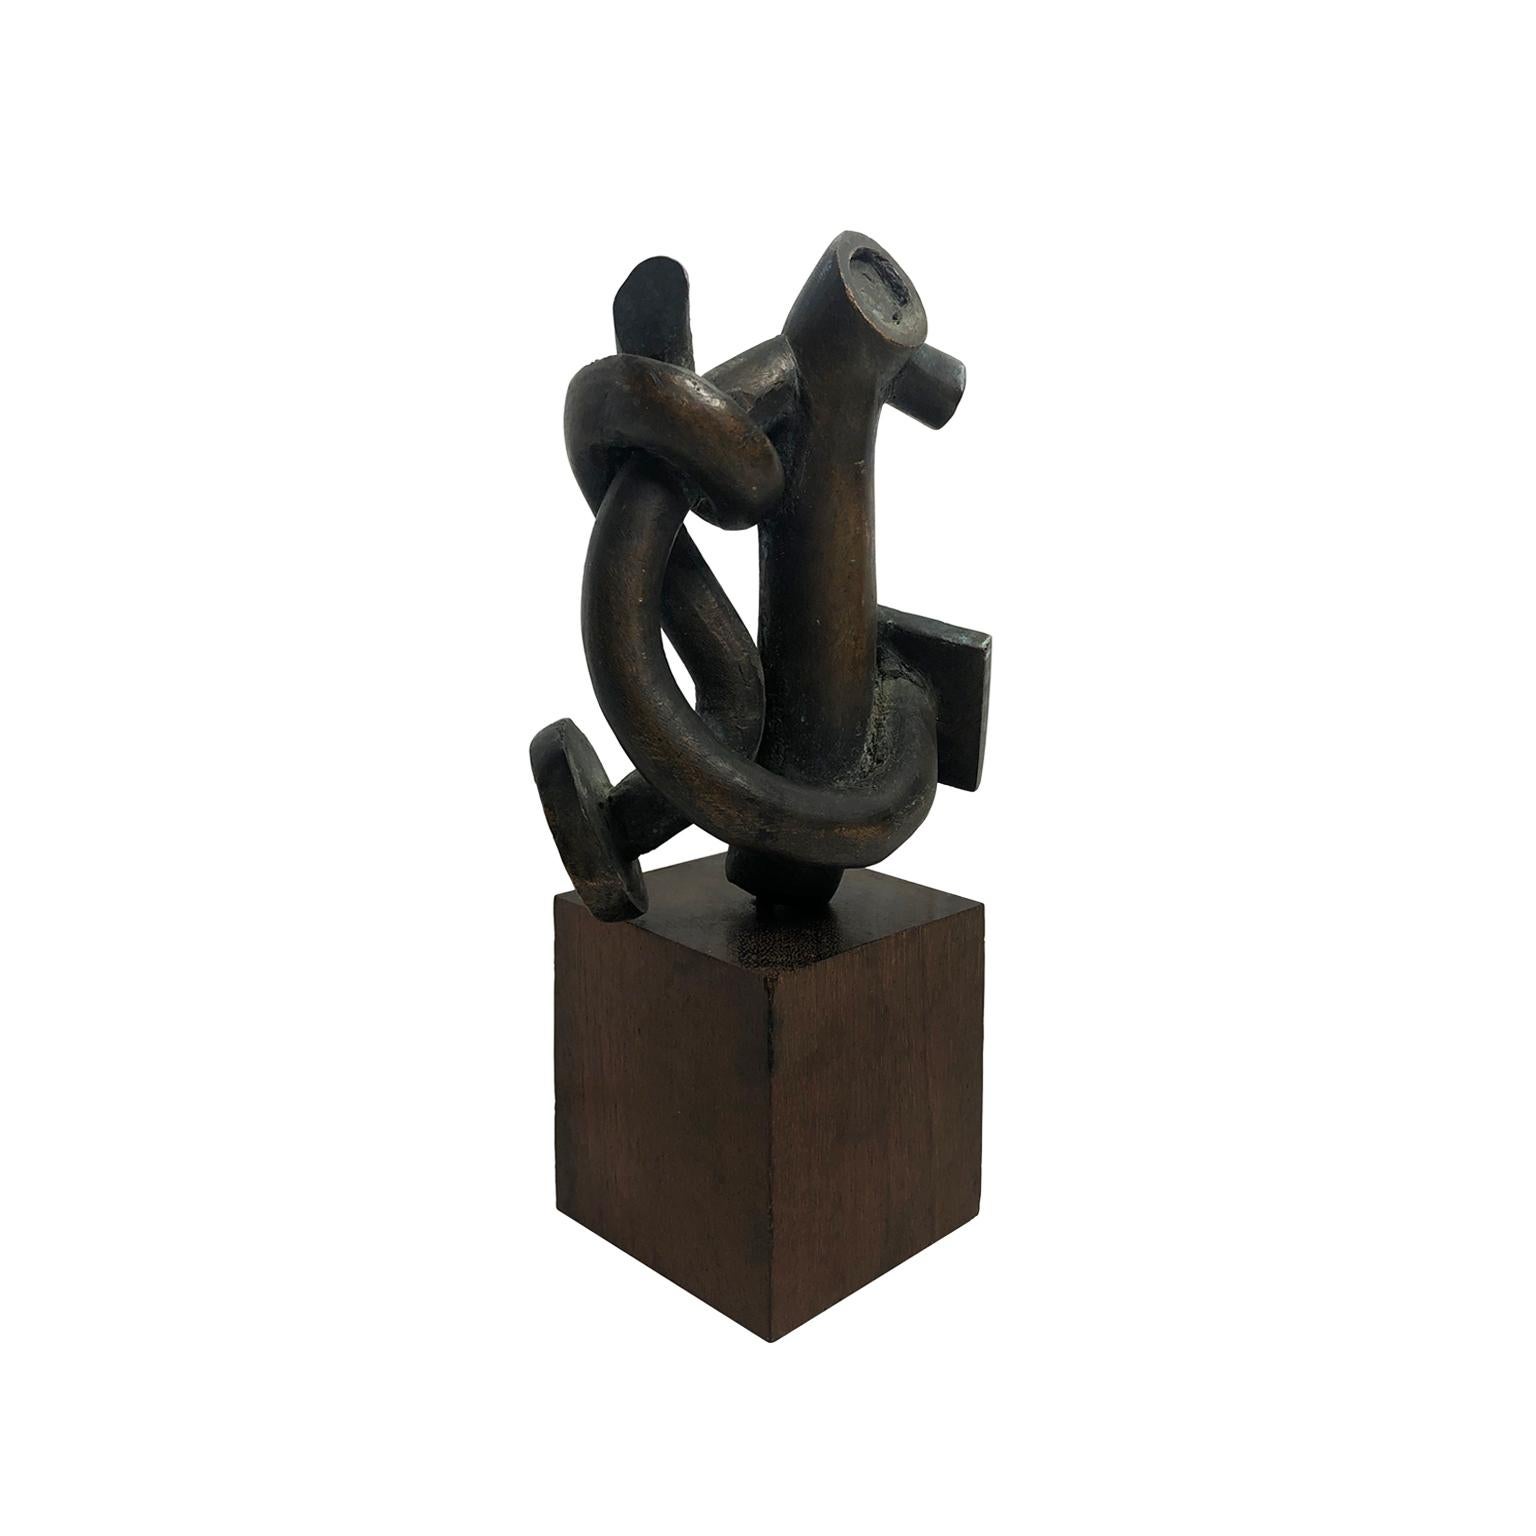 Small abstract twisted bronze sculpture on wood base. USA, 1970s.